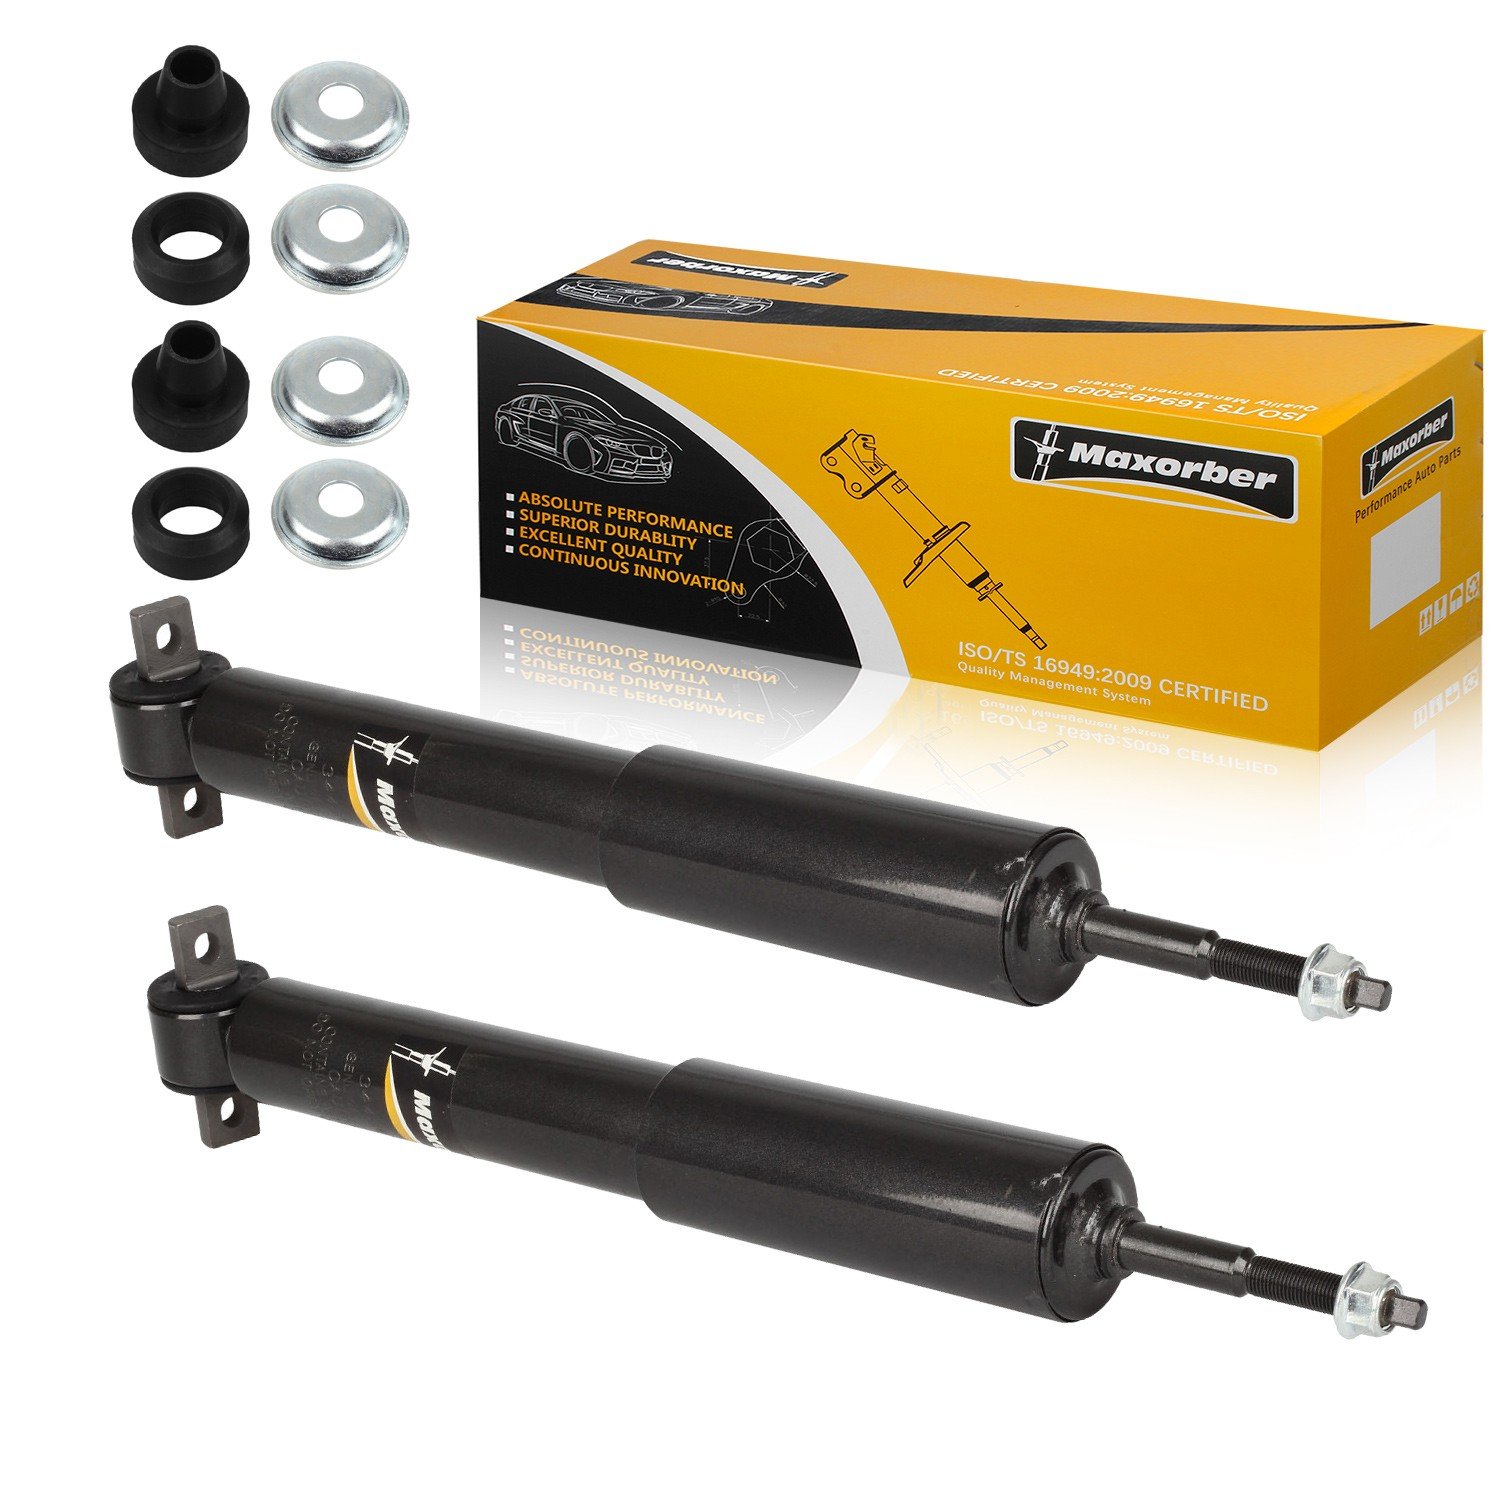 Maxorber Front Left Right Shocks Struts Absorber Compatible with F-150 Expedition RWD,Lincoln Navigator RWD 98-02 Replacement for F-250 1997-1999 RWD Shocks Absorber 344367